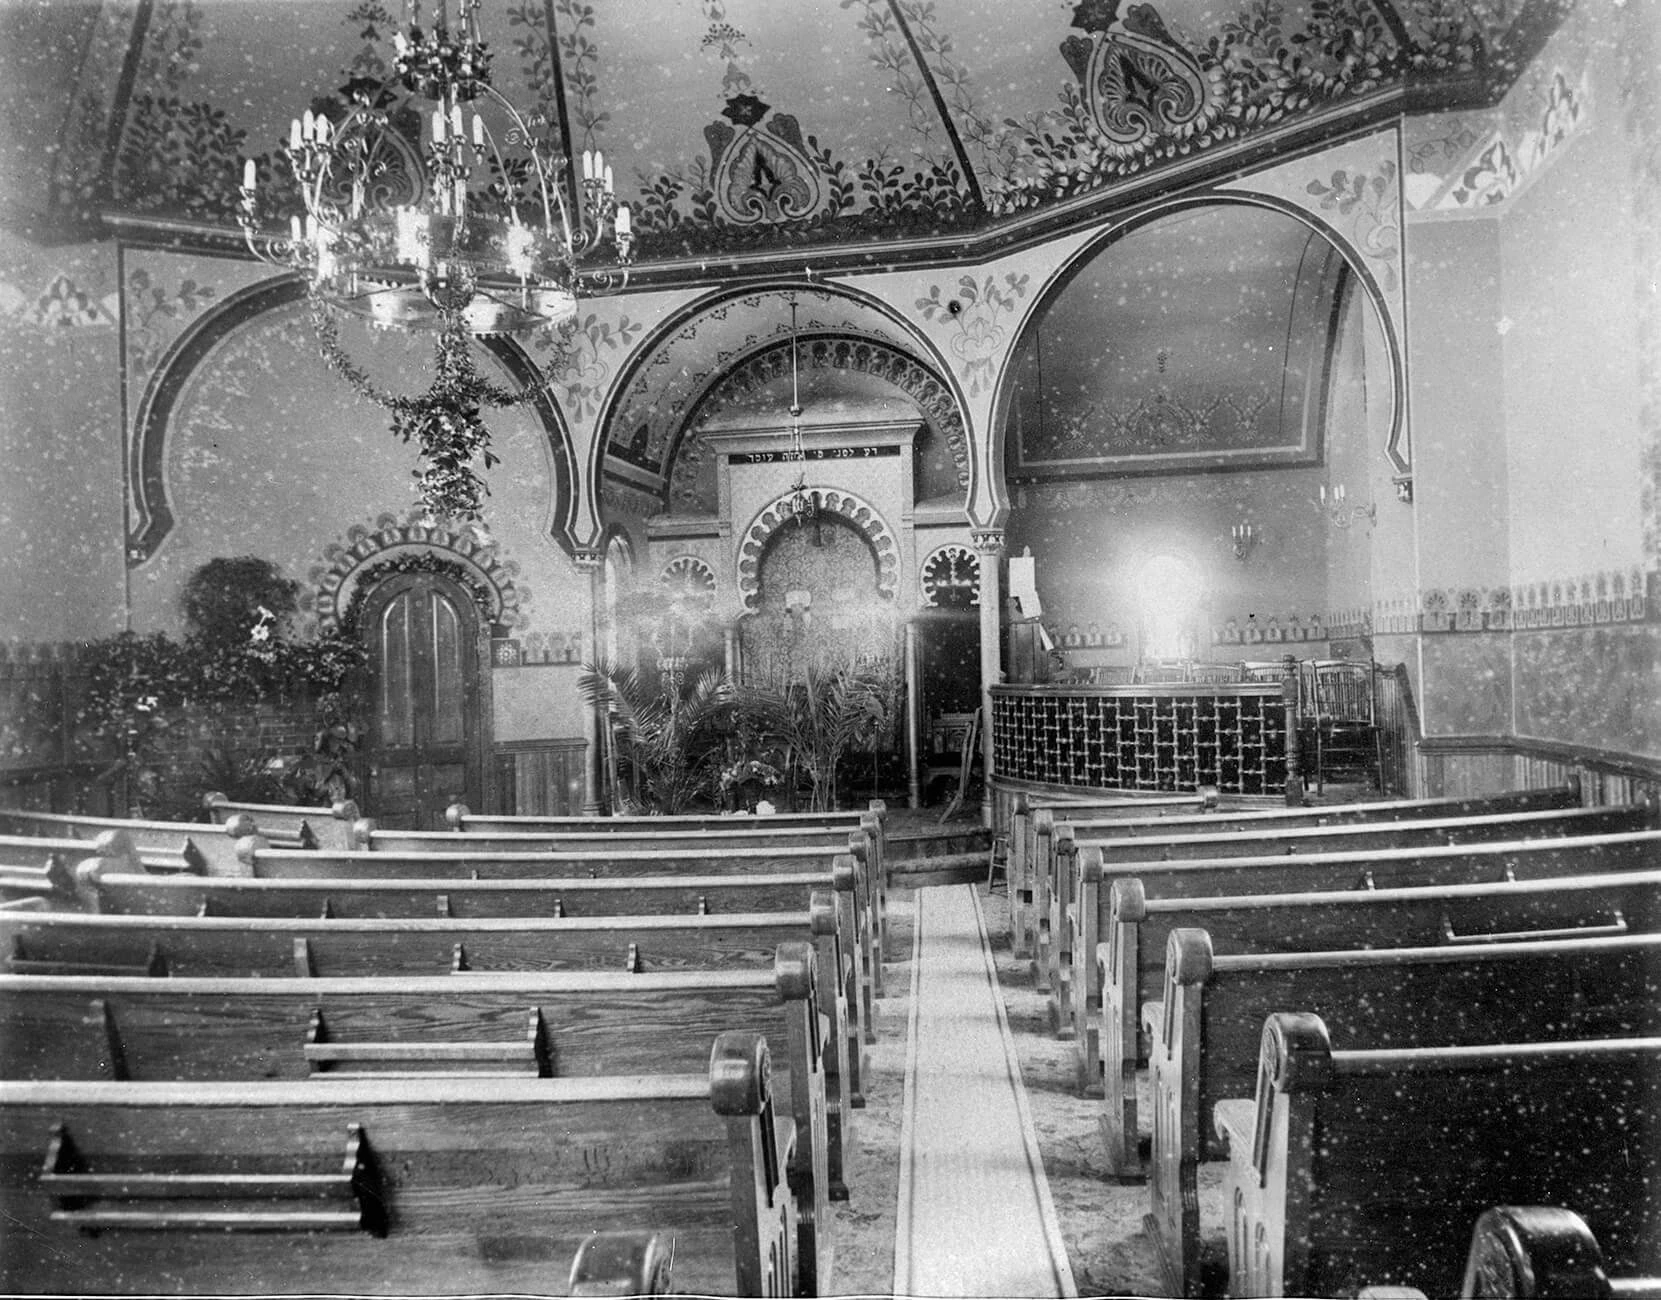 wooden pews face an arched room with ornate chandelier